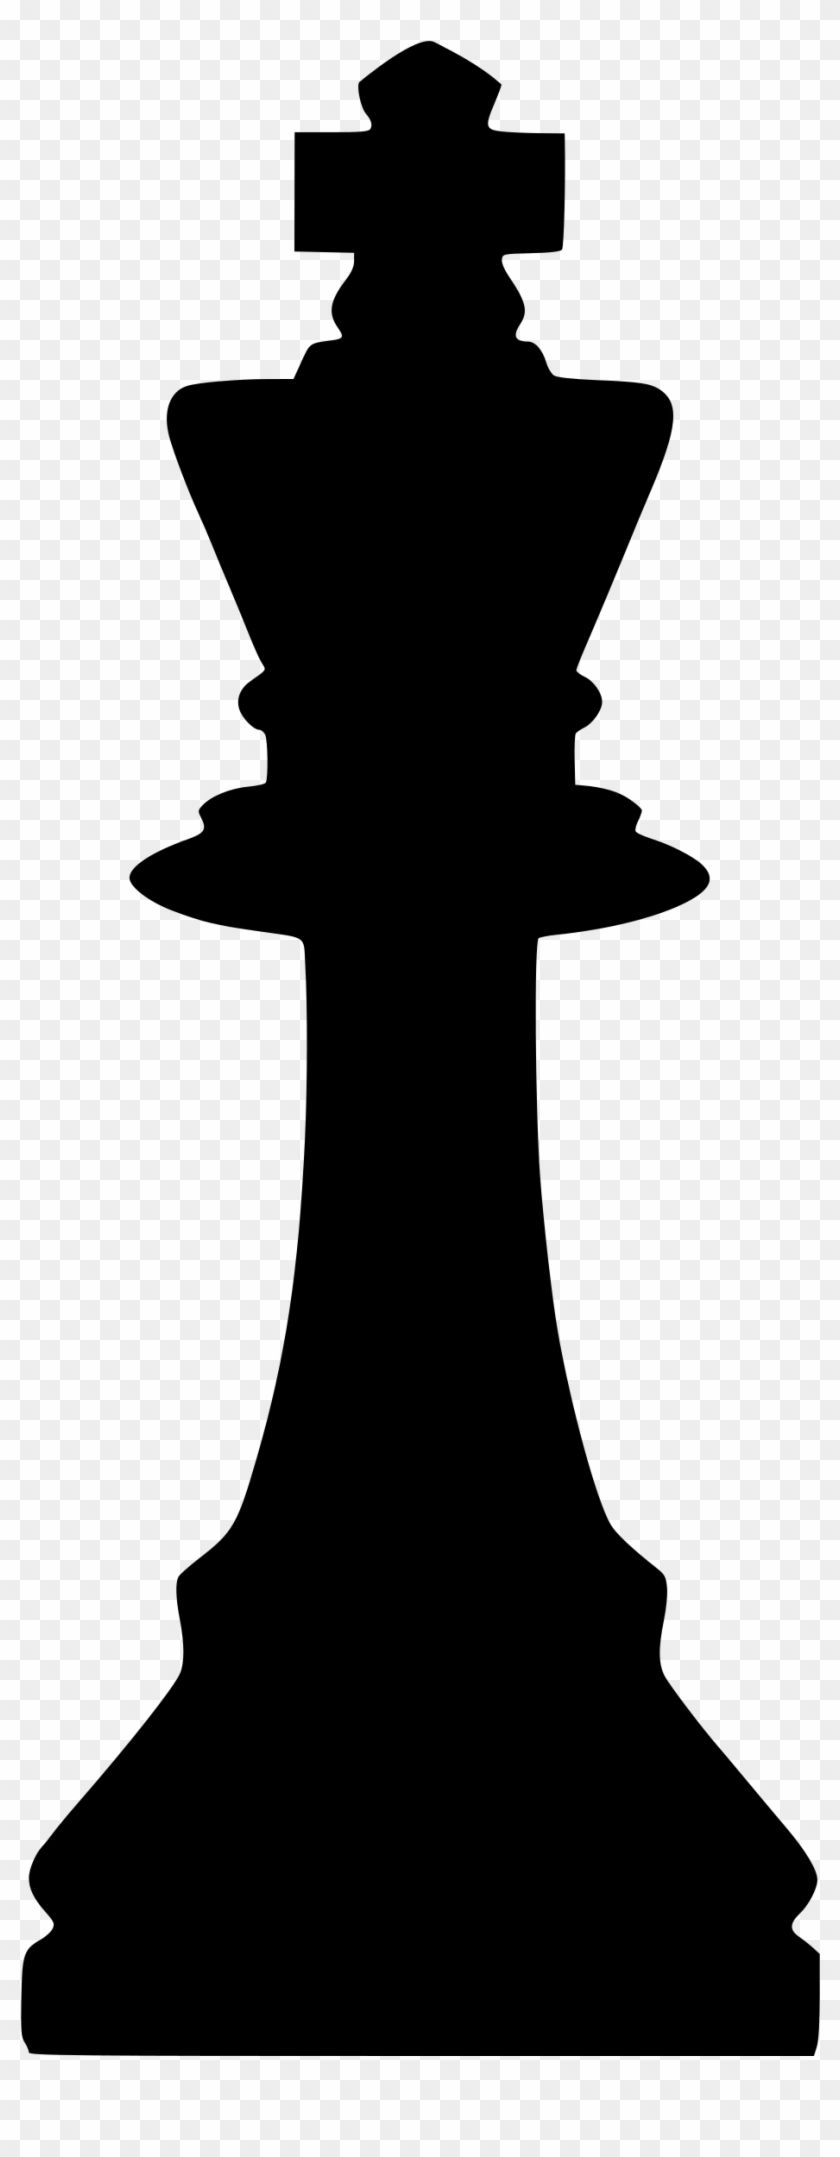 Chess Piece Remix King Rey Big Image - Chess Piece Vector Png #1406243